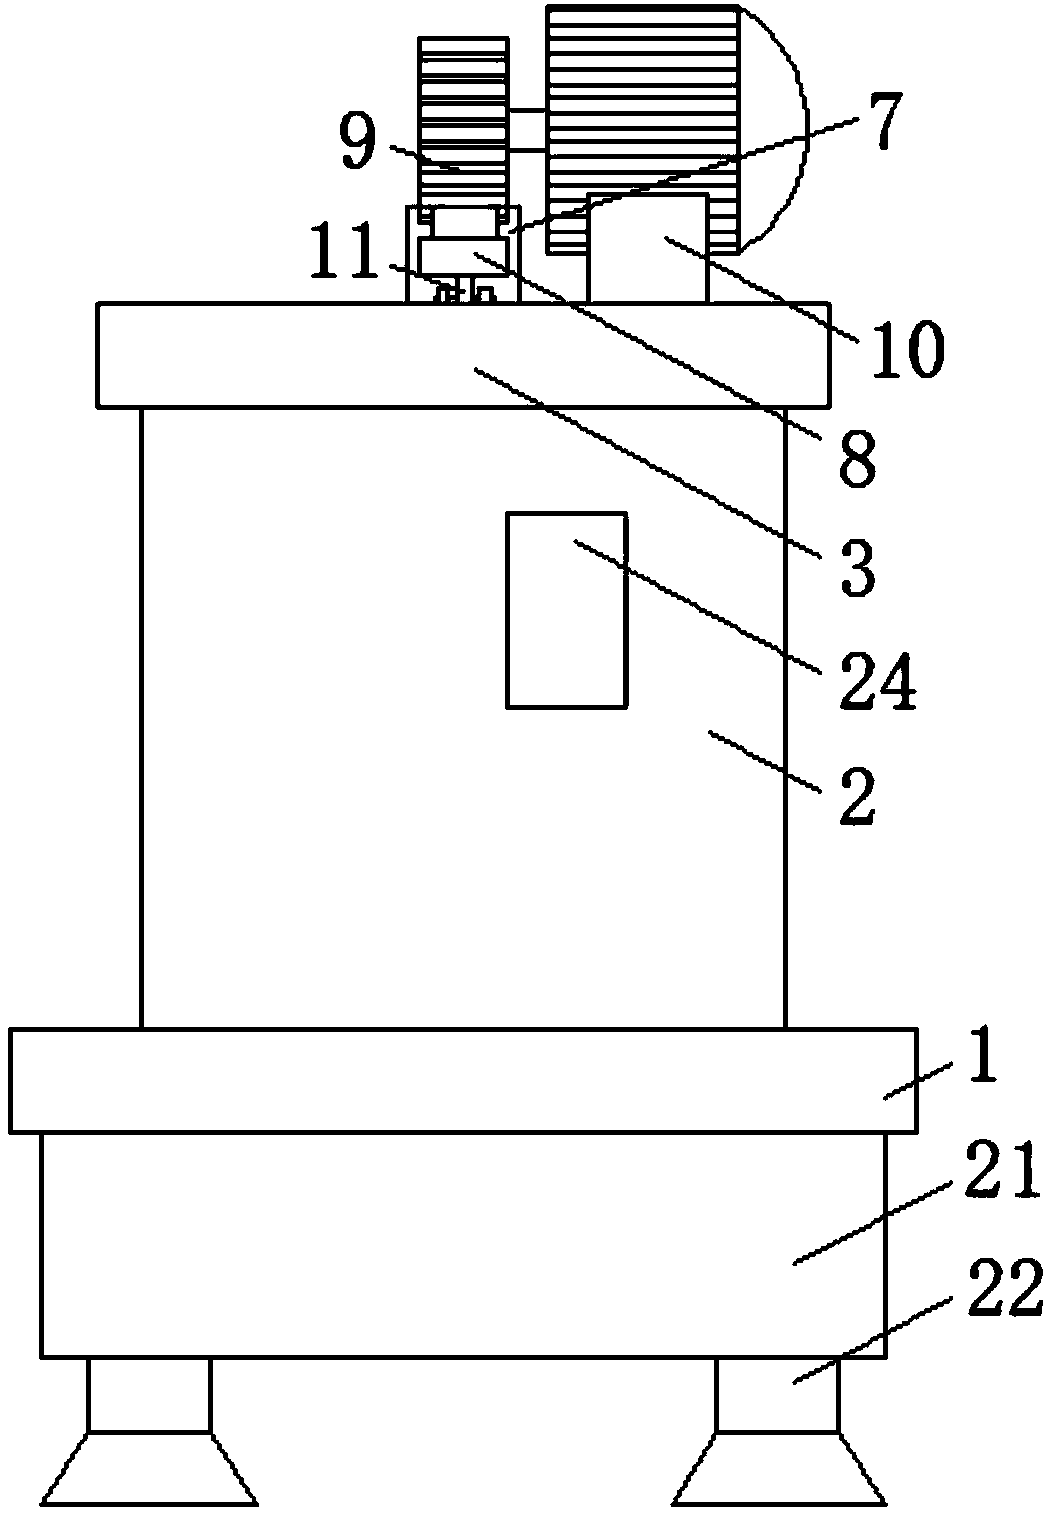 Die-cutting machine allowing position of die-cutting tool to be conveniently adjusted